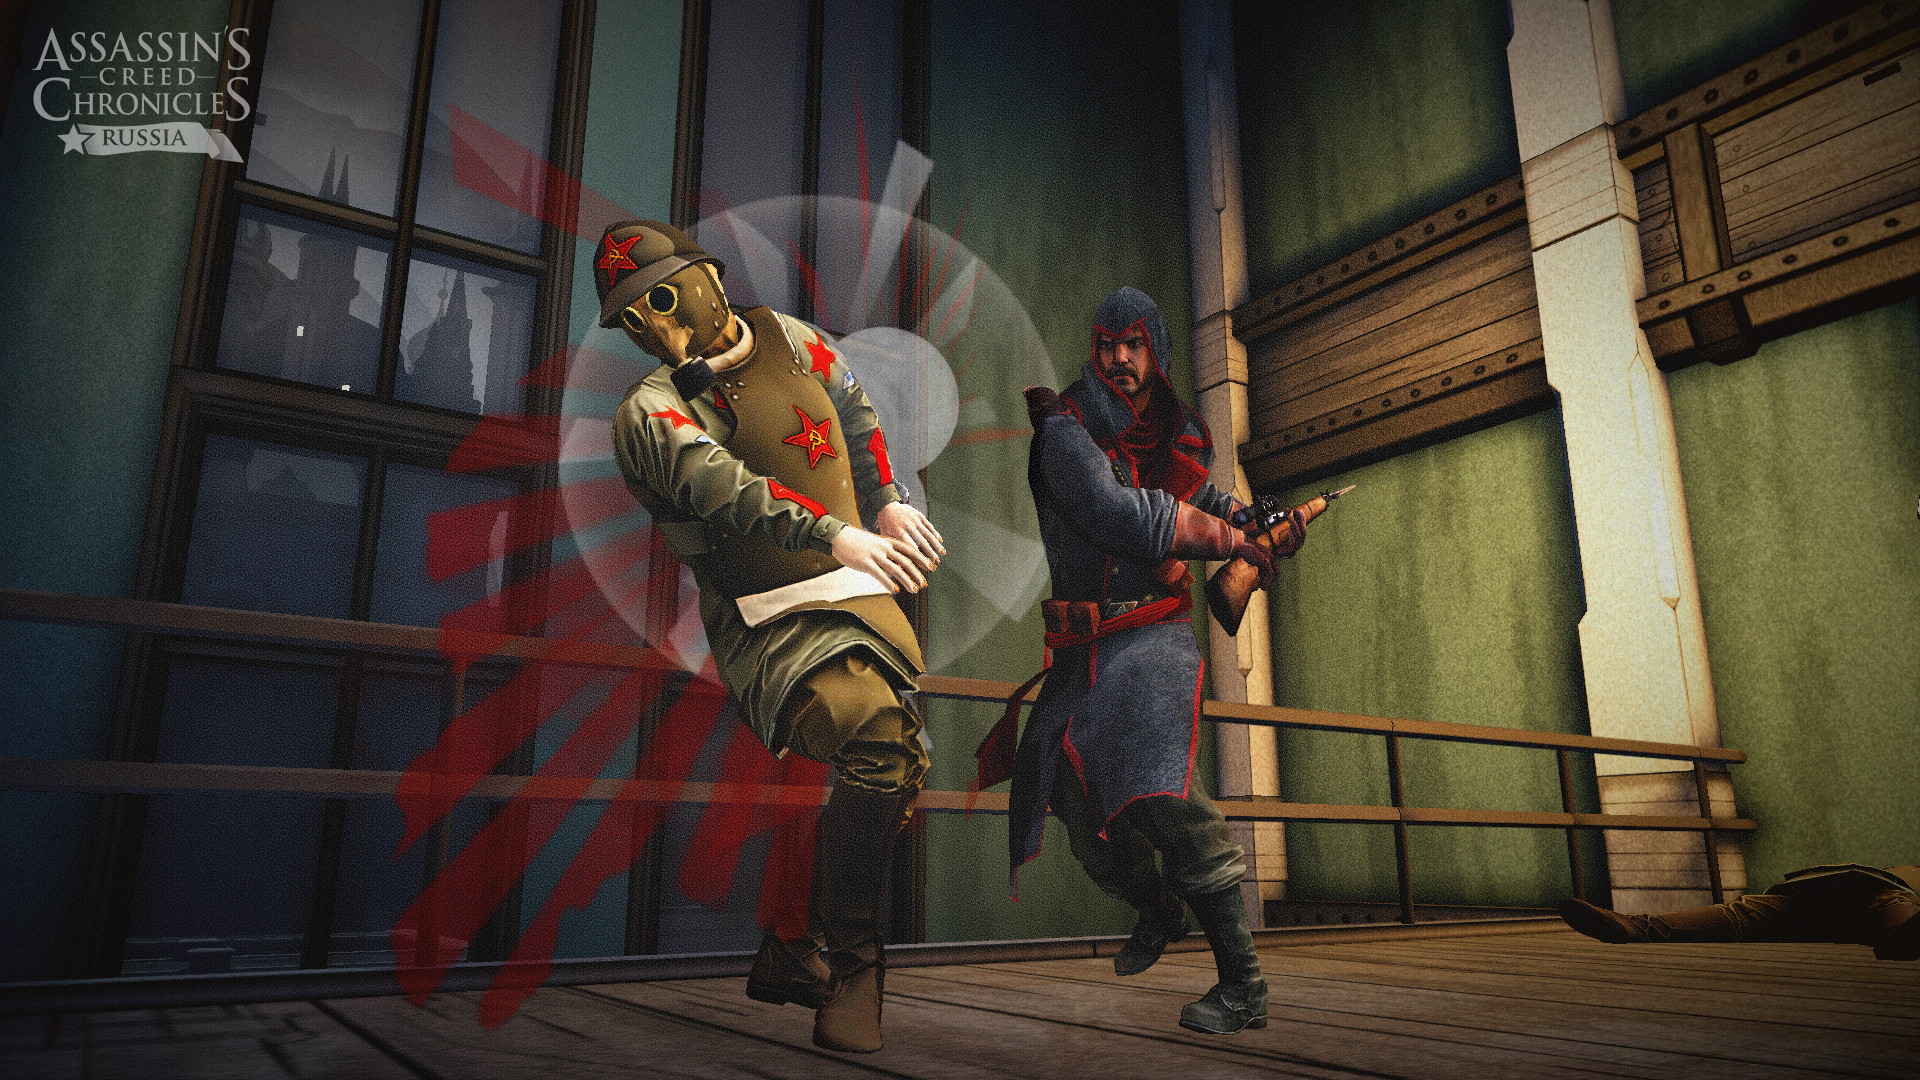 Assassin's Creed Chronicles: Russia - screenshot 4